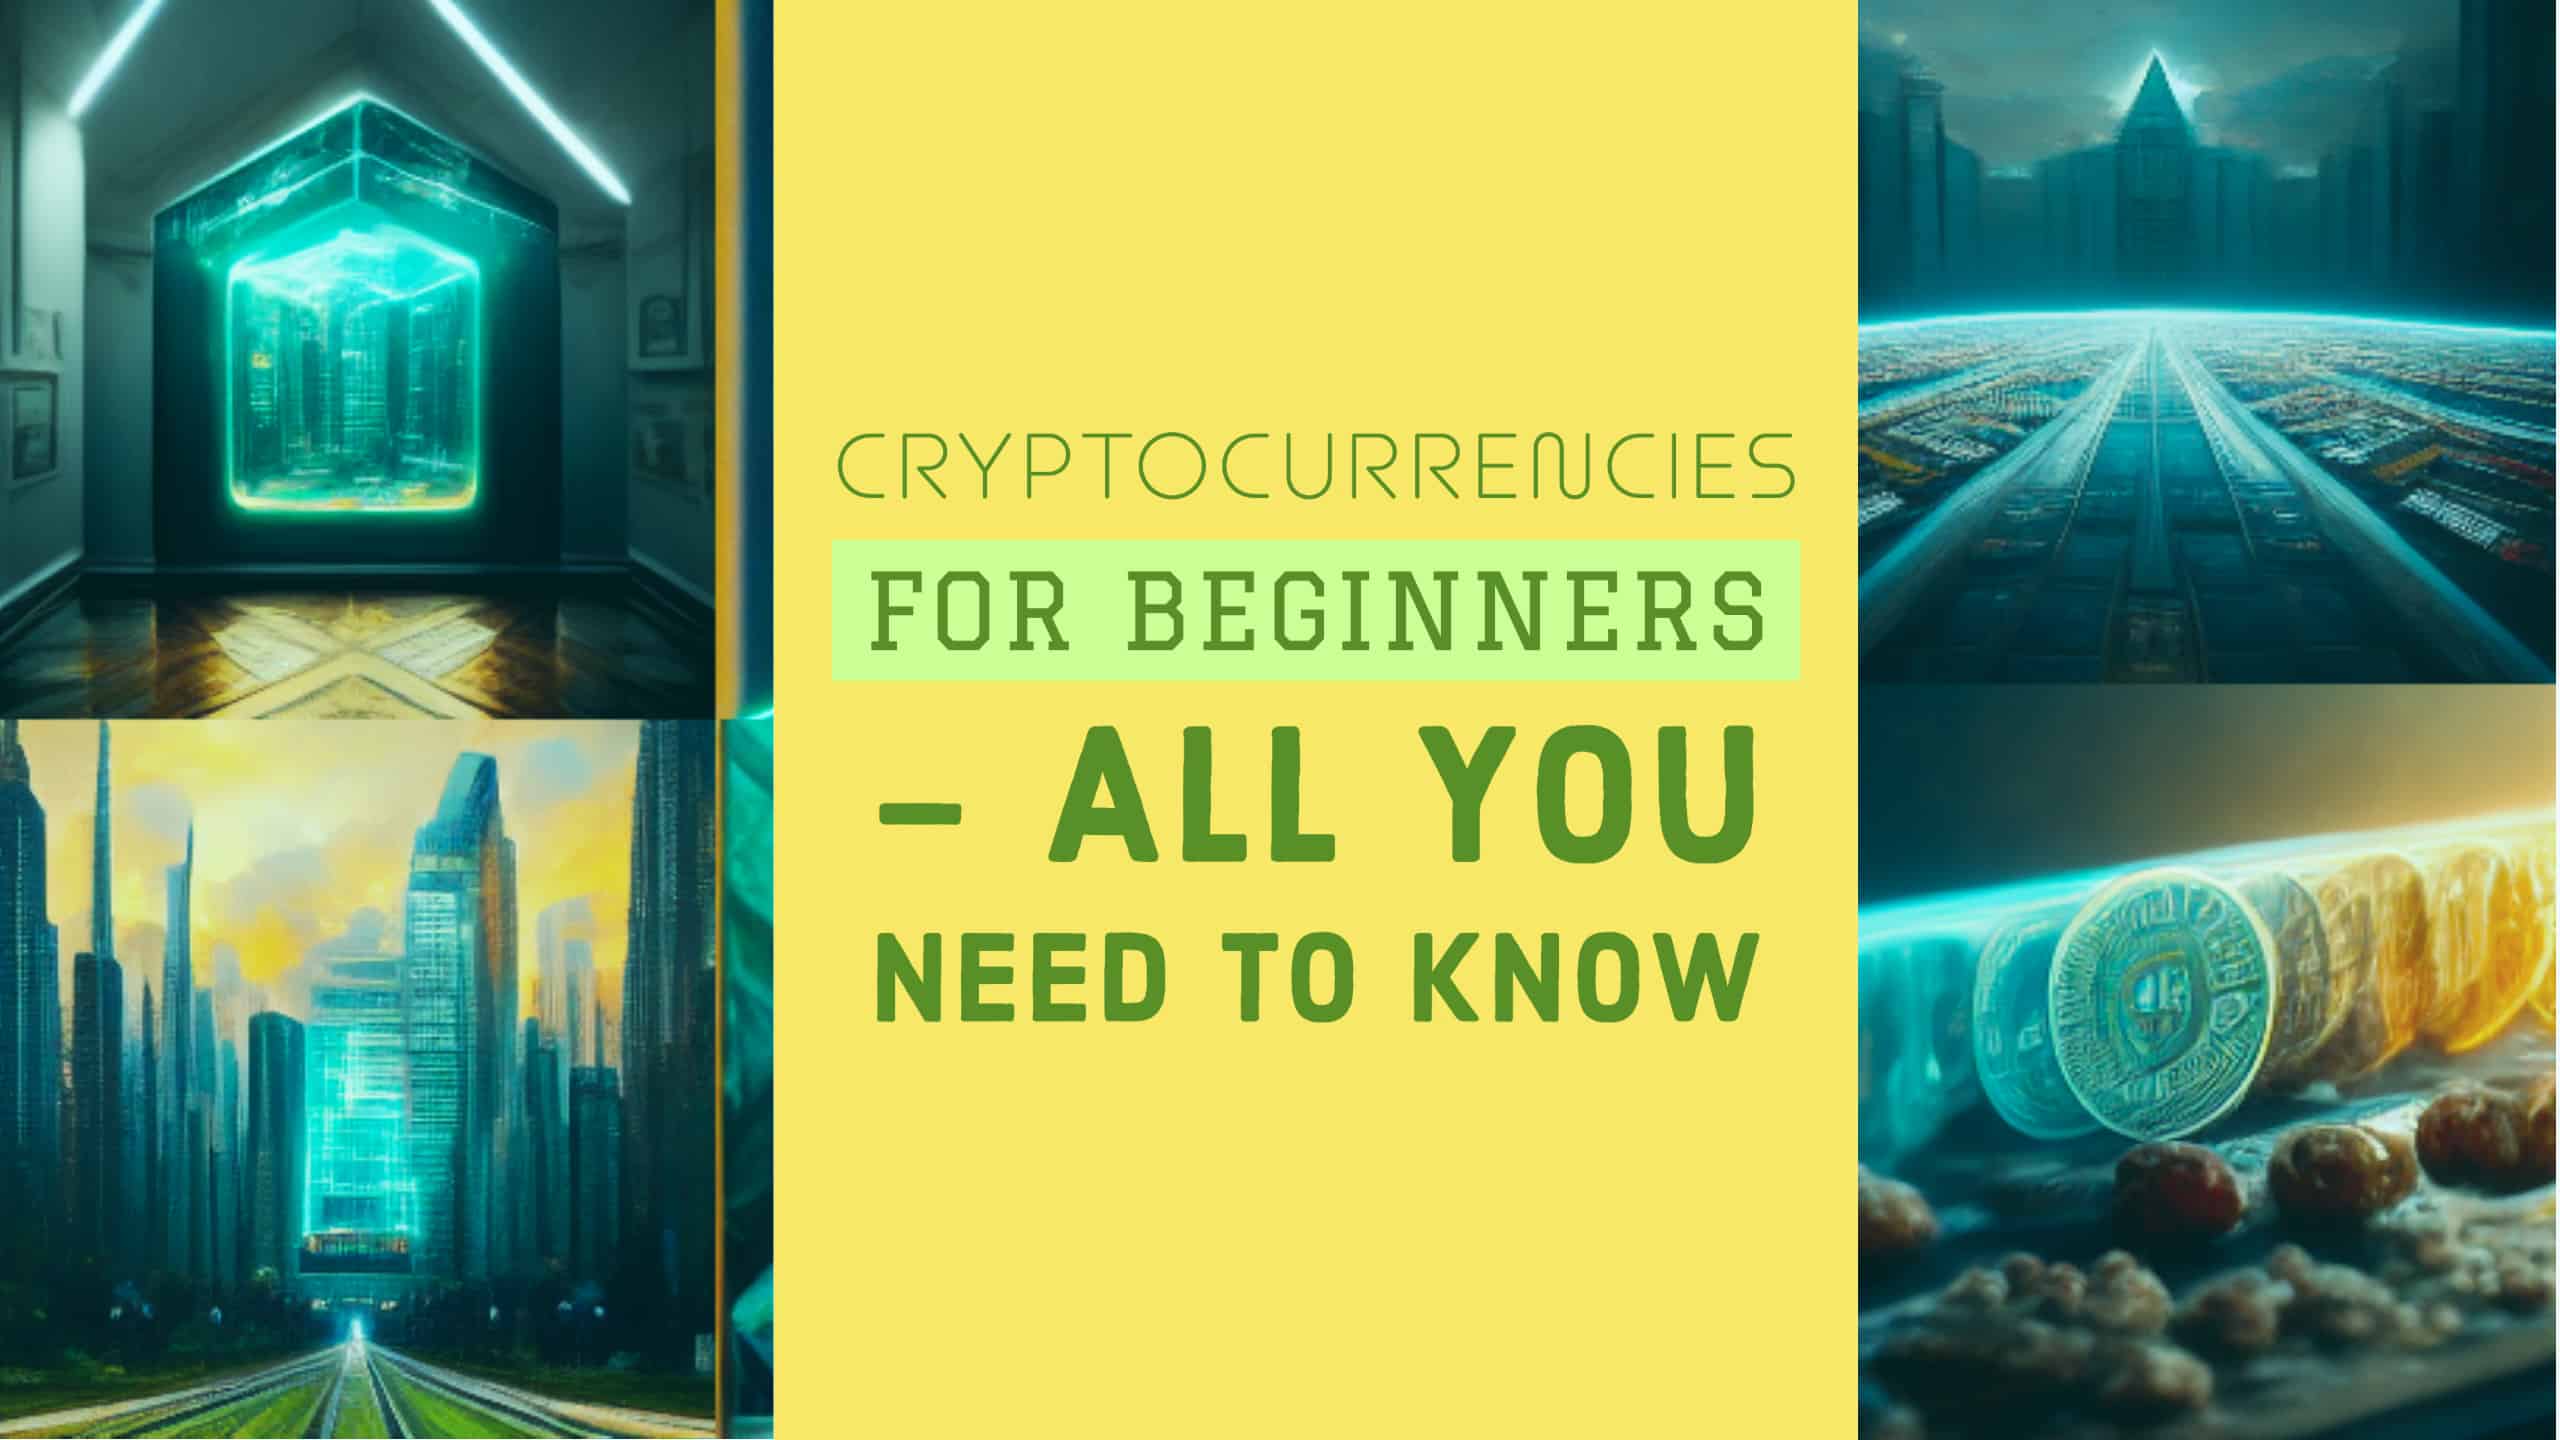 Cryptocurrencies for beginners – All you need to know